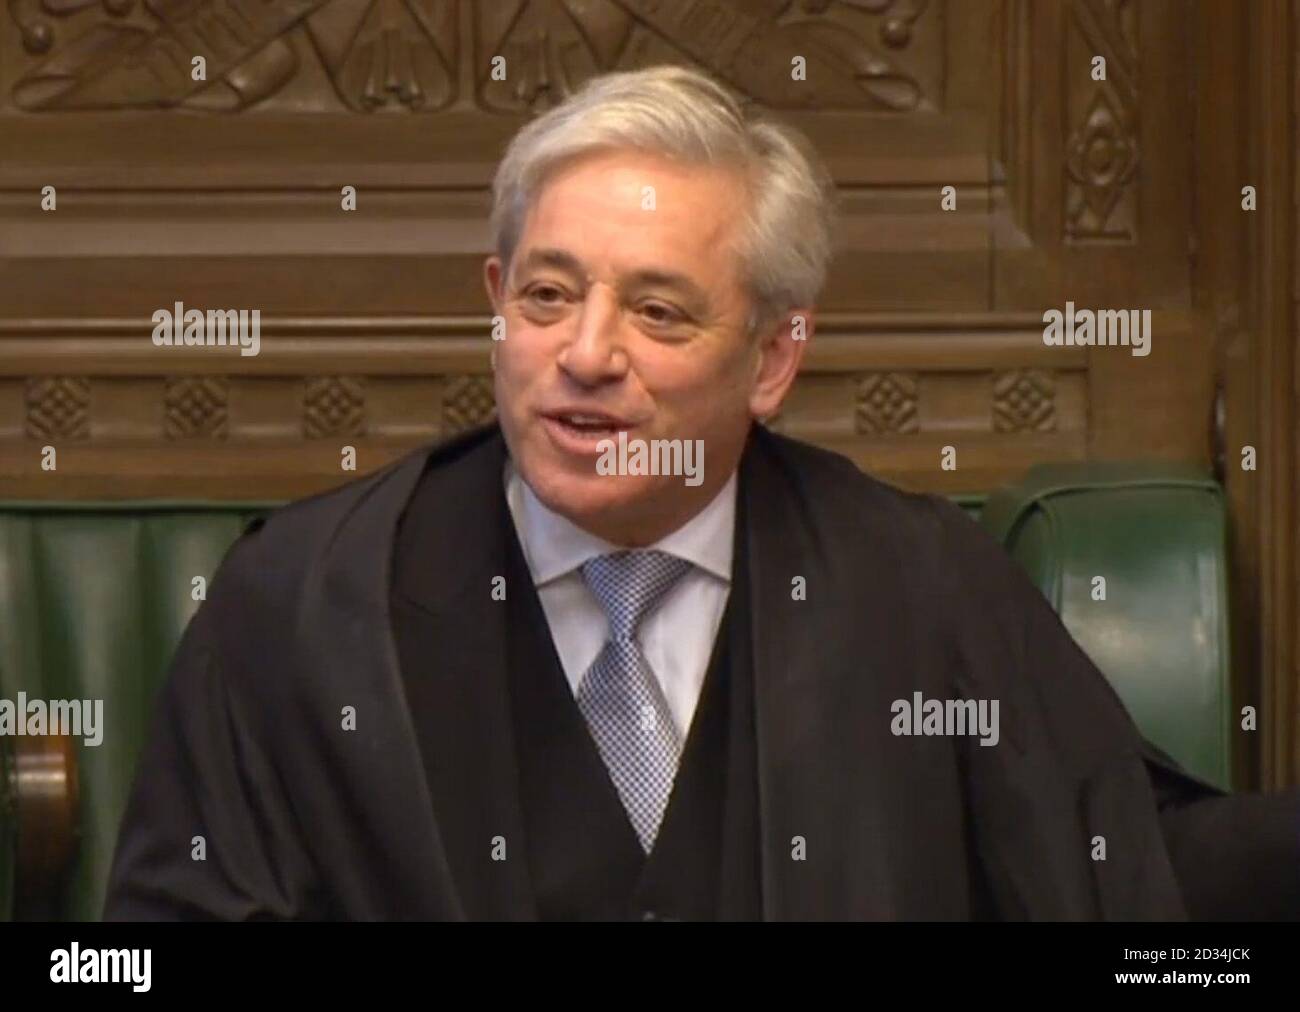 Speaker John Bercow interjects as Rebecca Pow raises a point during Prime Minister's Questions in the House of Commons, London, as the Conservative MP for Taunton Deane prompted howls of laughter from fellow MPs as she speculated over the speaker's shower habits. Stock Photo